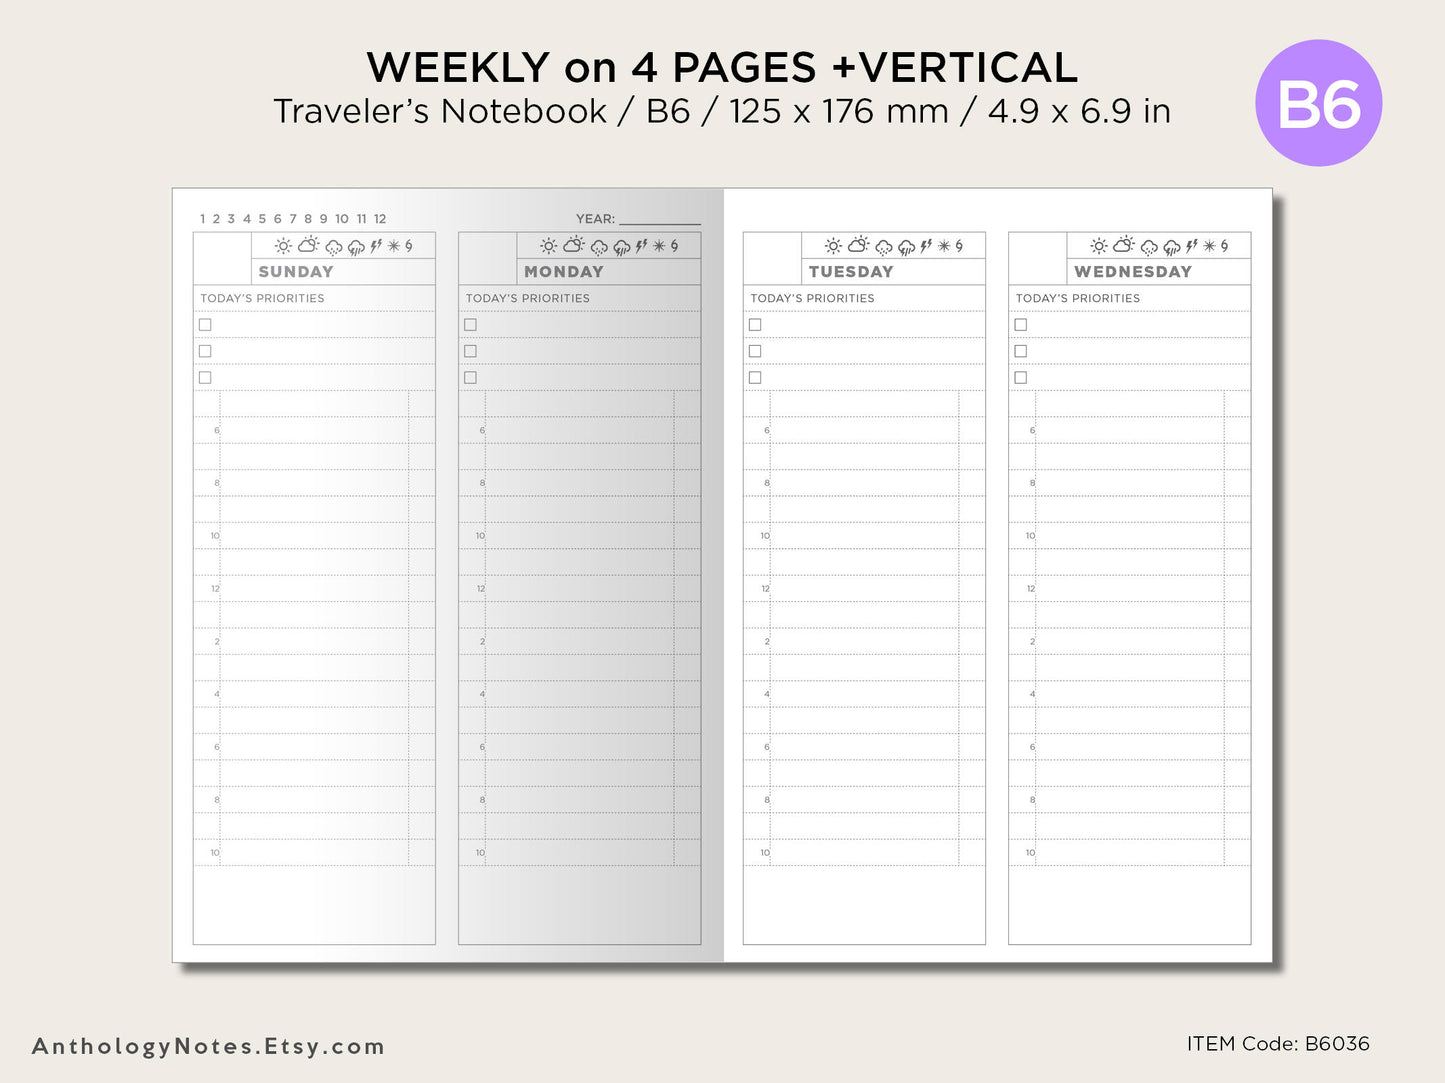 B6 Weekly on 4 Pages Vertical - Wo4P - Printable Grid - Traveler's Notebook - Wo2P - Minimalist /